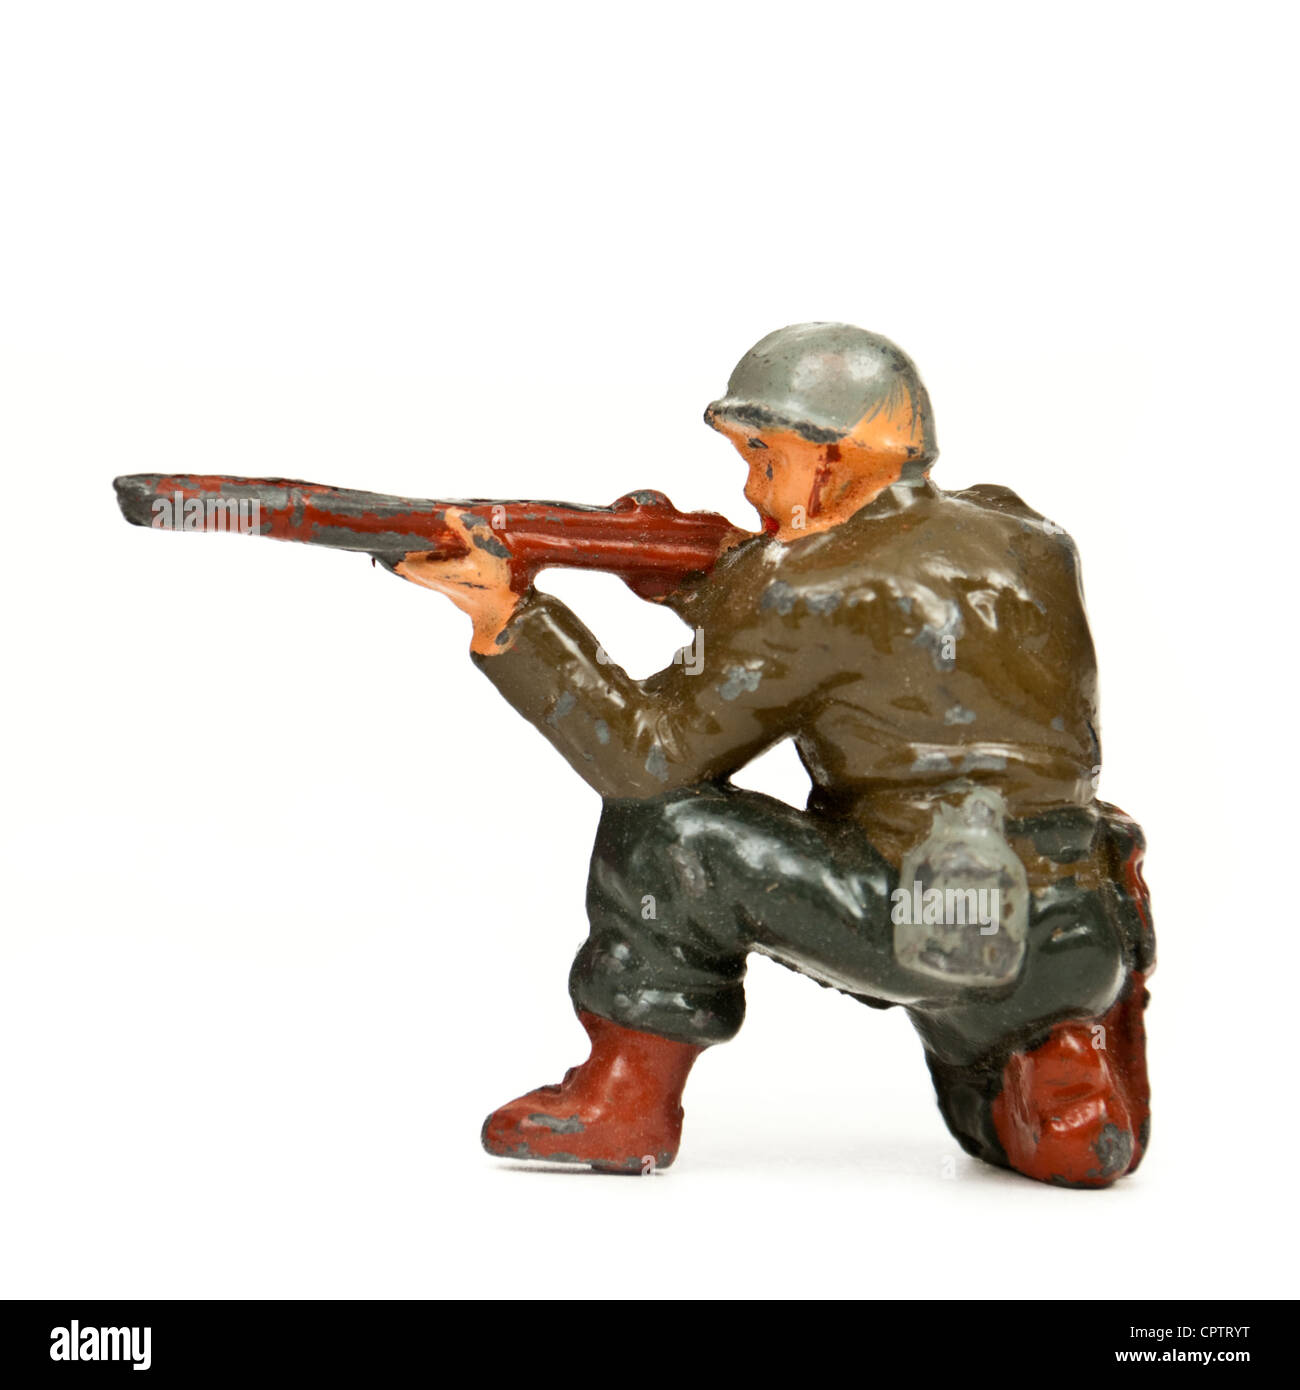 Vintage lead toy soldier Stock Photo